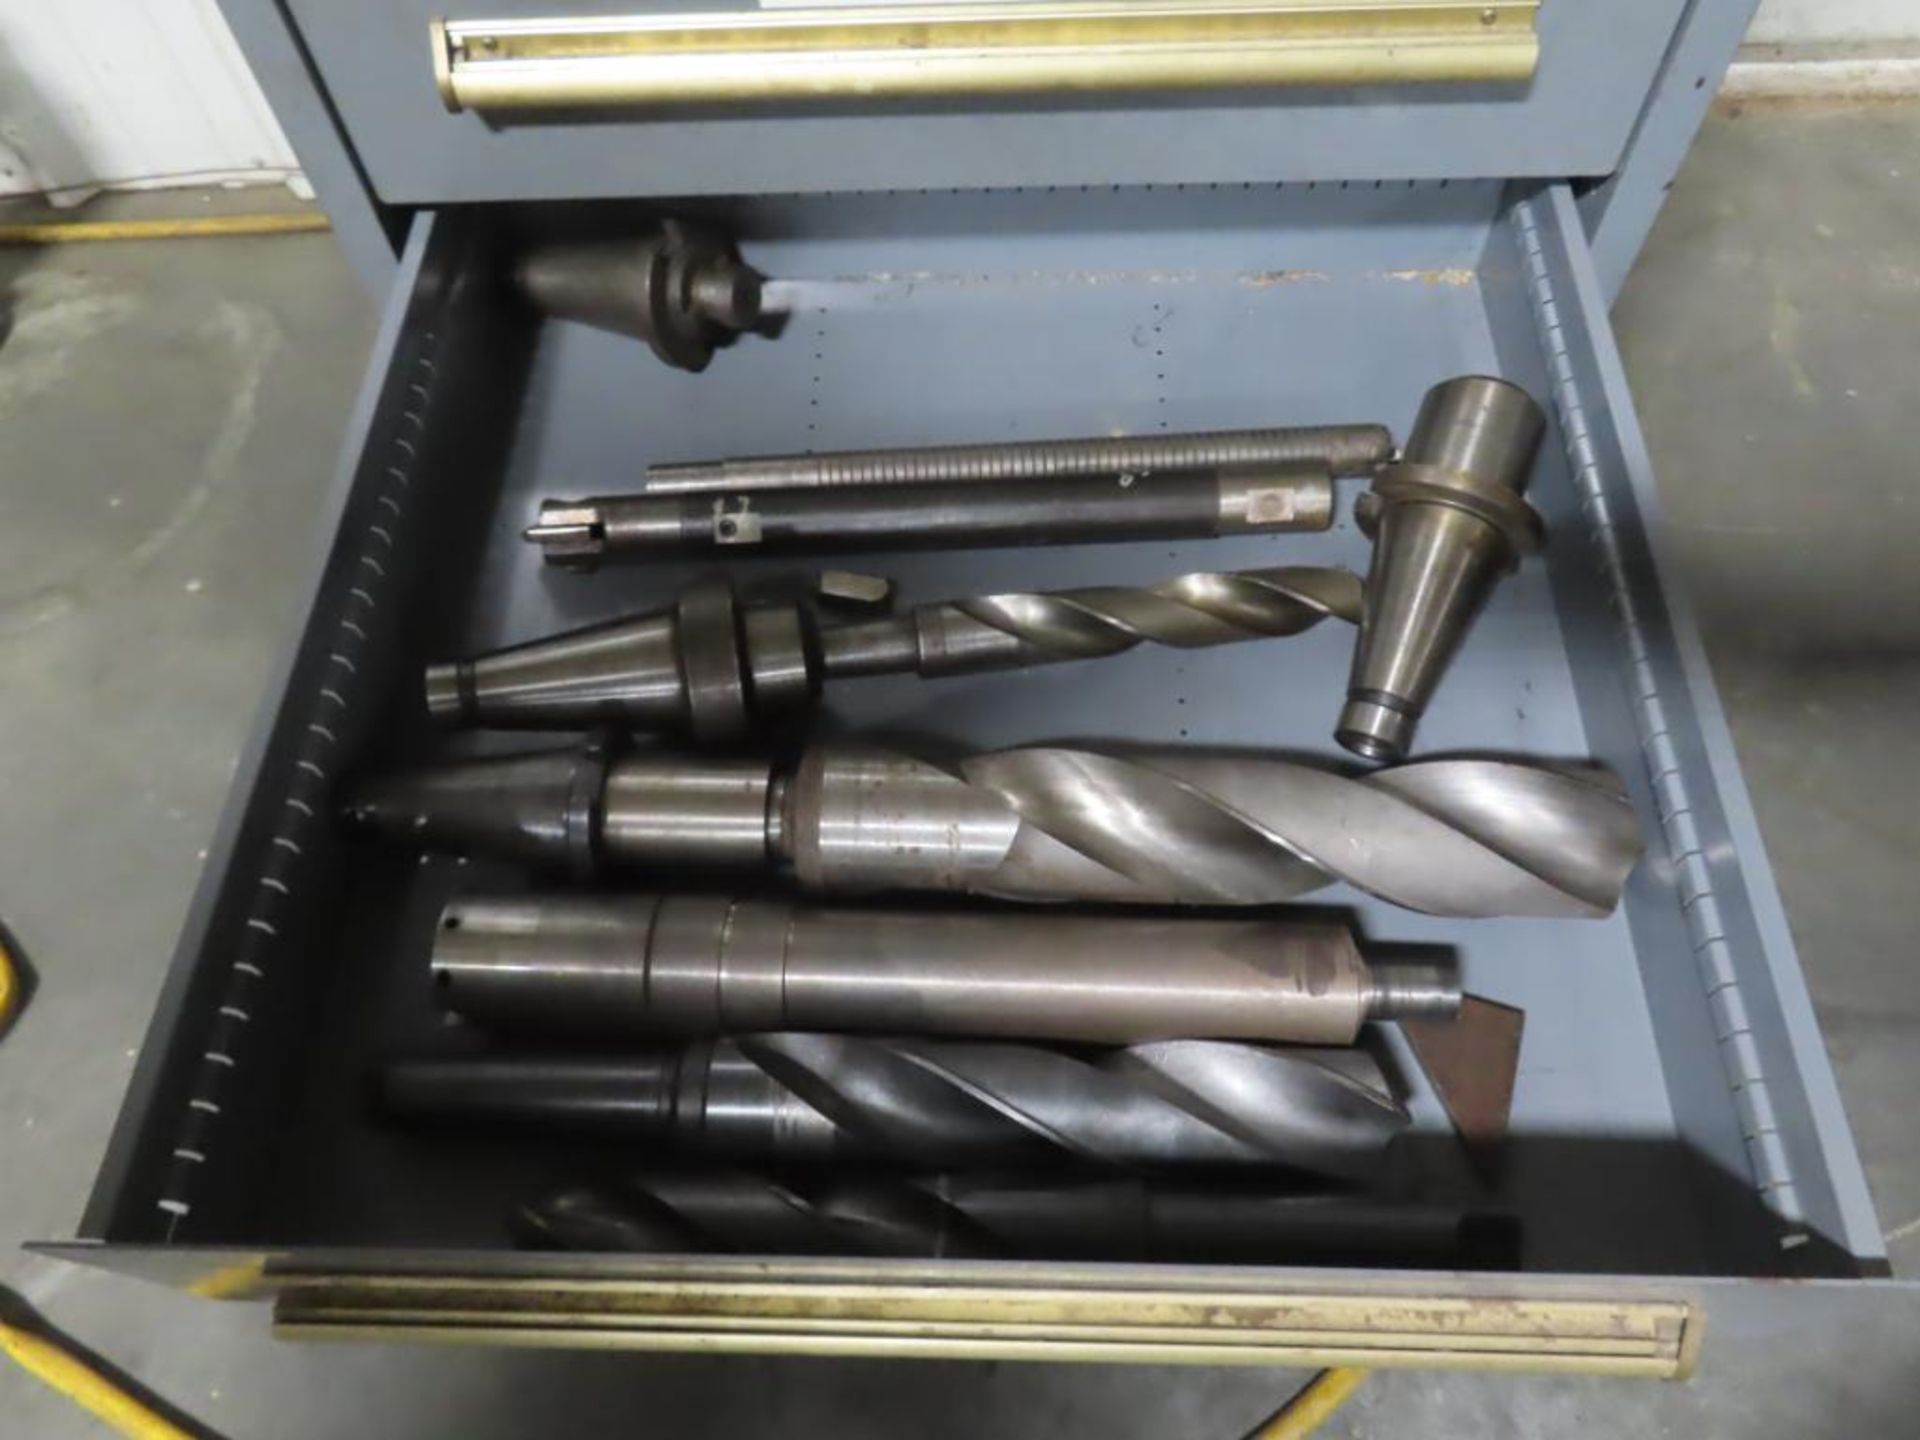 EQUIPTO 9-DRAWER TOOL CABINET W/CONTENTS - MILL TOOLING, CUTTERS & HOLD DOWNS - Image 9 of 11